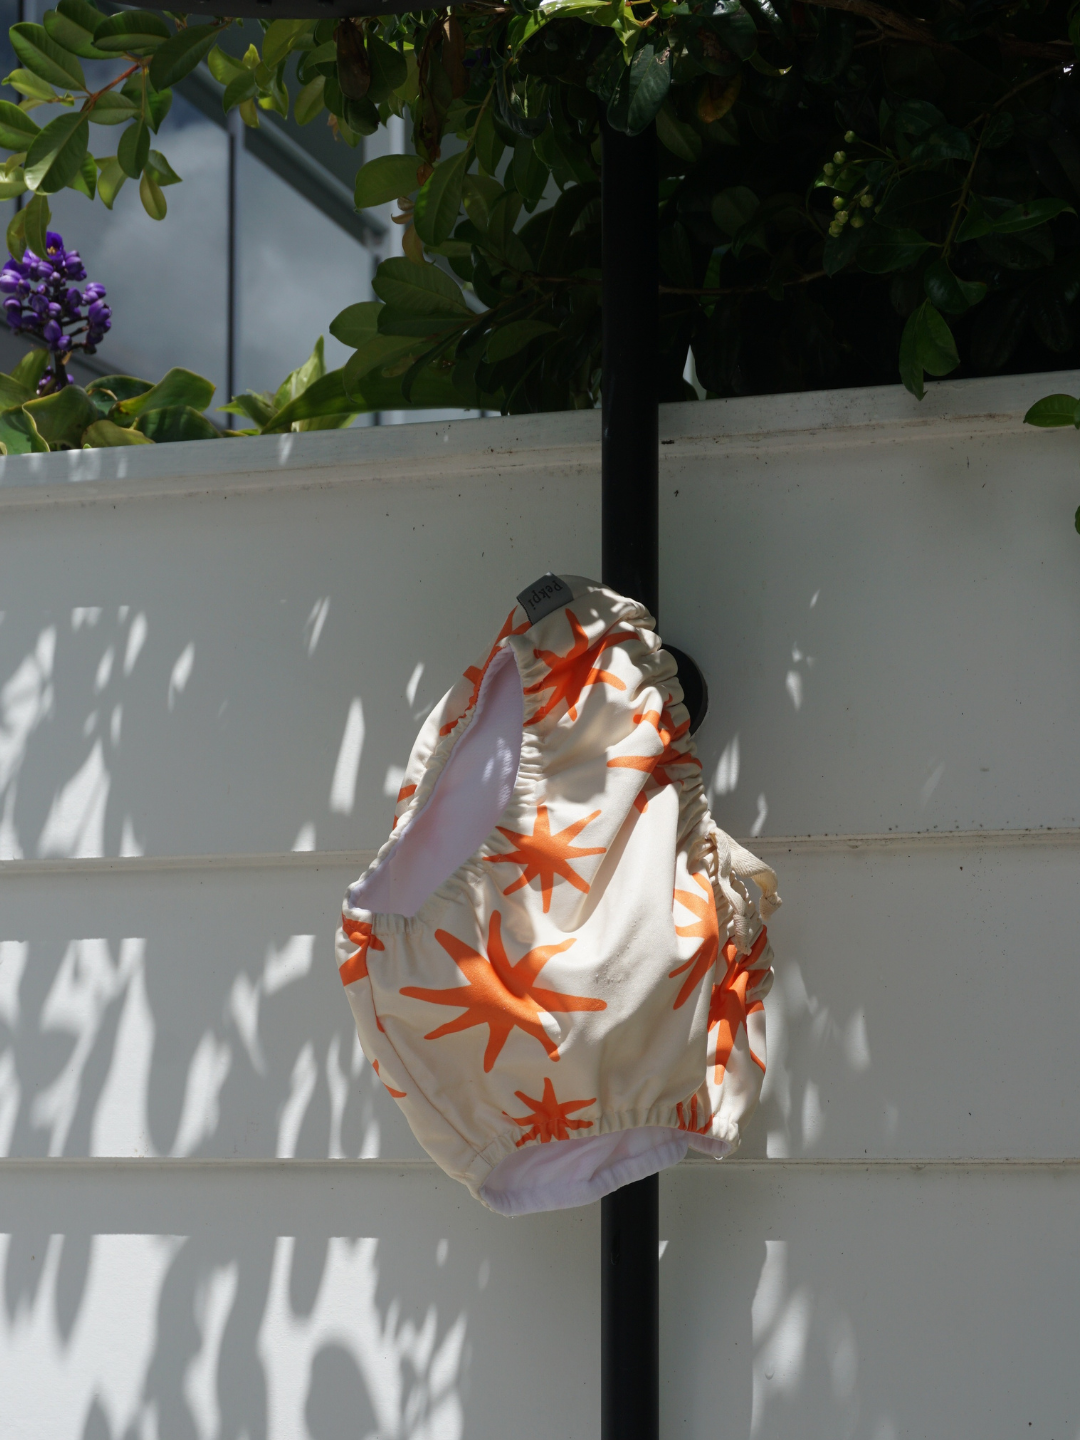 Capri | The swim diaper has an elastic waist with a tie and elastic leg holes. The diaper is a cream color with orange stars shapes all over. It is hanging on an outdoor shower in the sunlight.